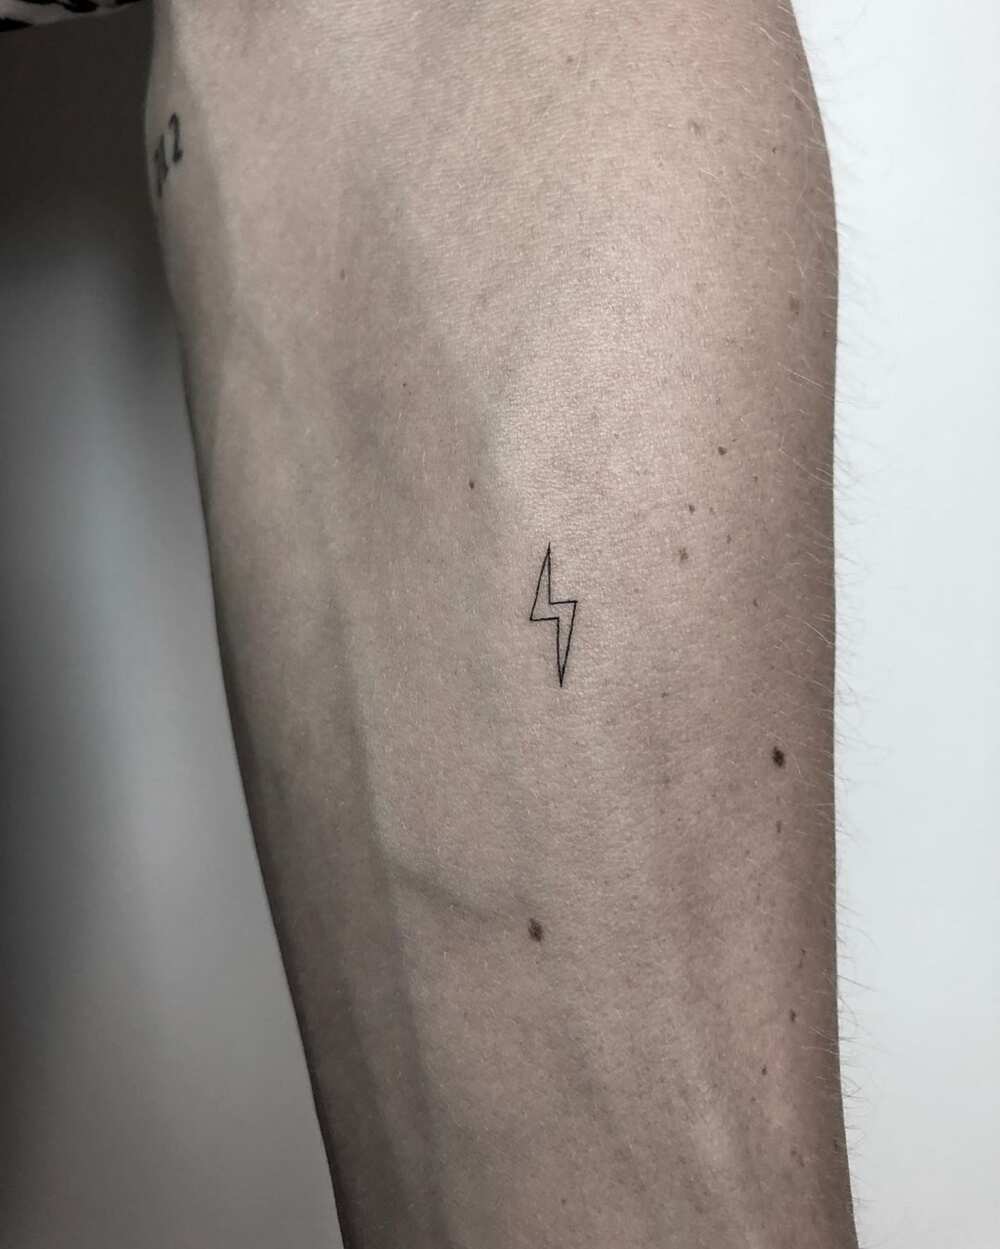 30 cool small tattoos for men 